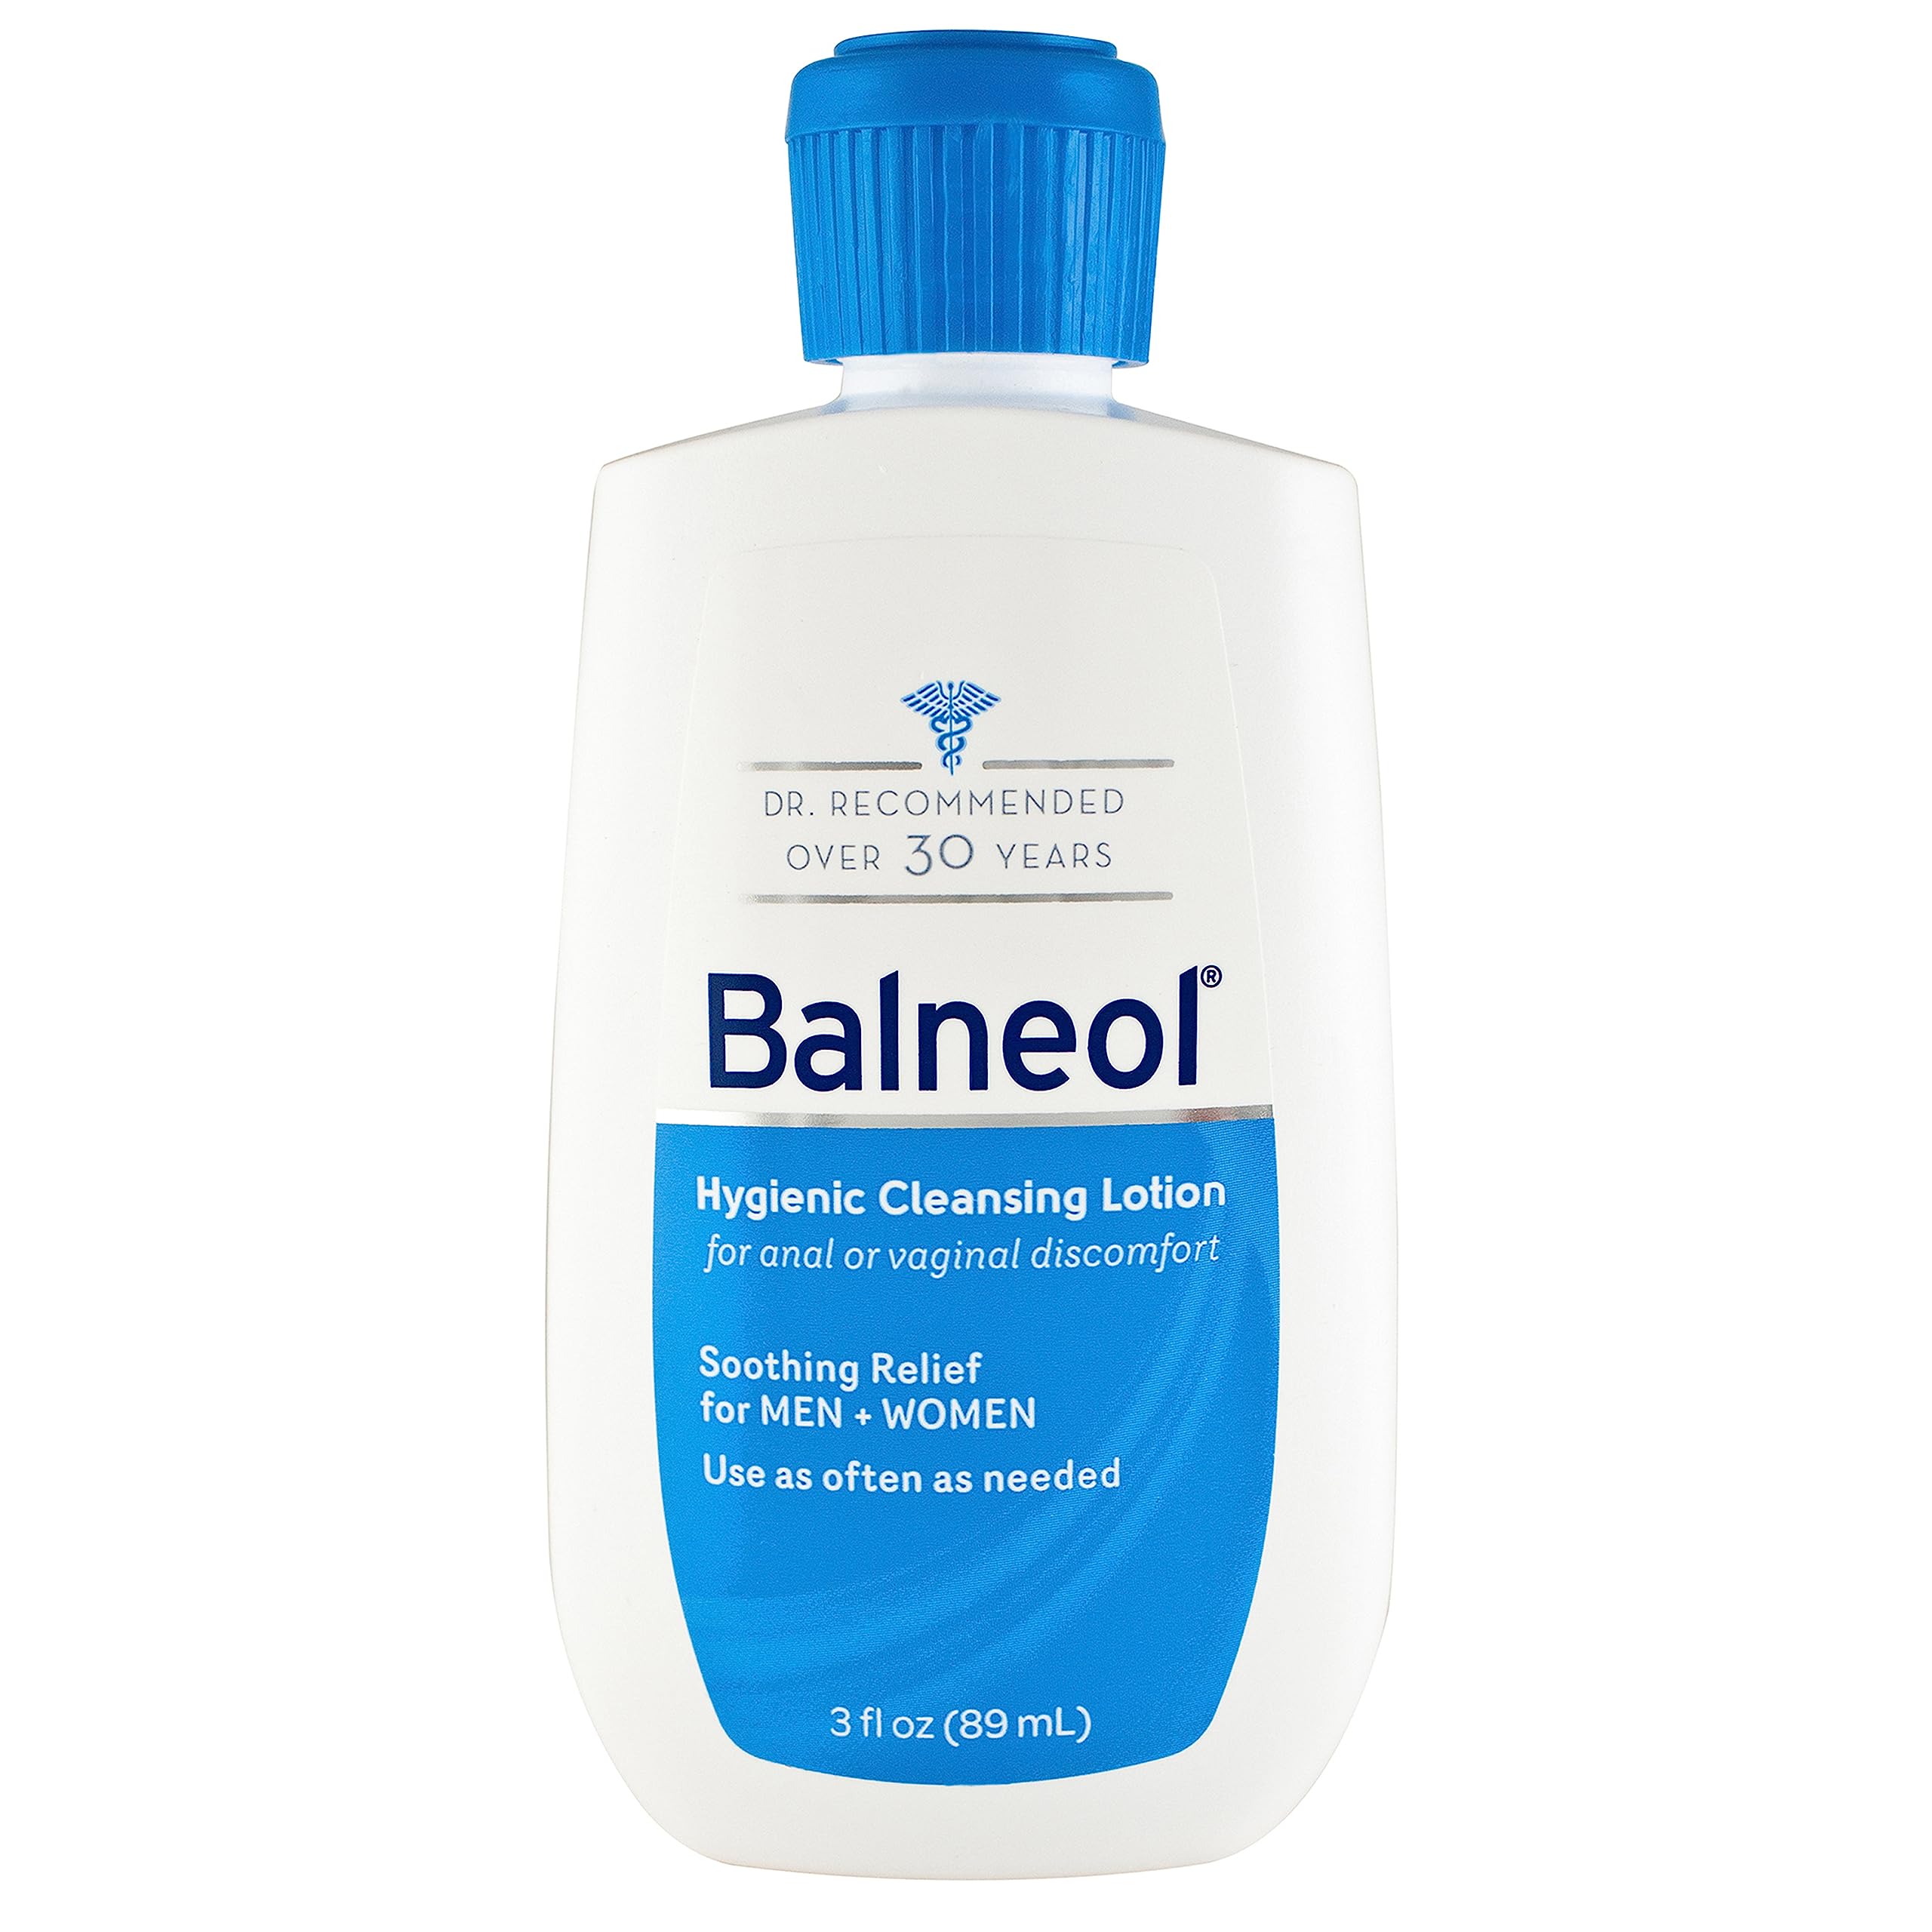 Balneol Hygienic Cleansing Lotion for Women and Men, Soothing Relief to Help With Pain Relief, Itch Relief, and Discomfort for Sensitive Areas, Made in USA, 3 oz